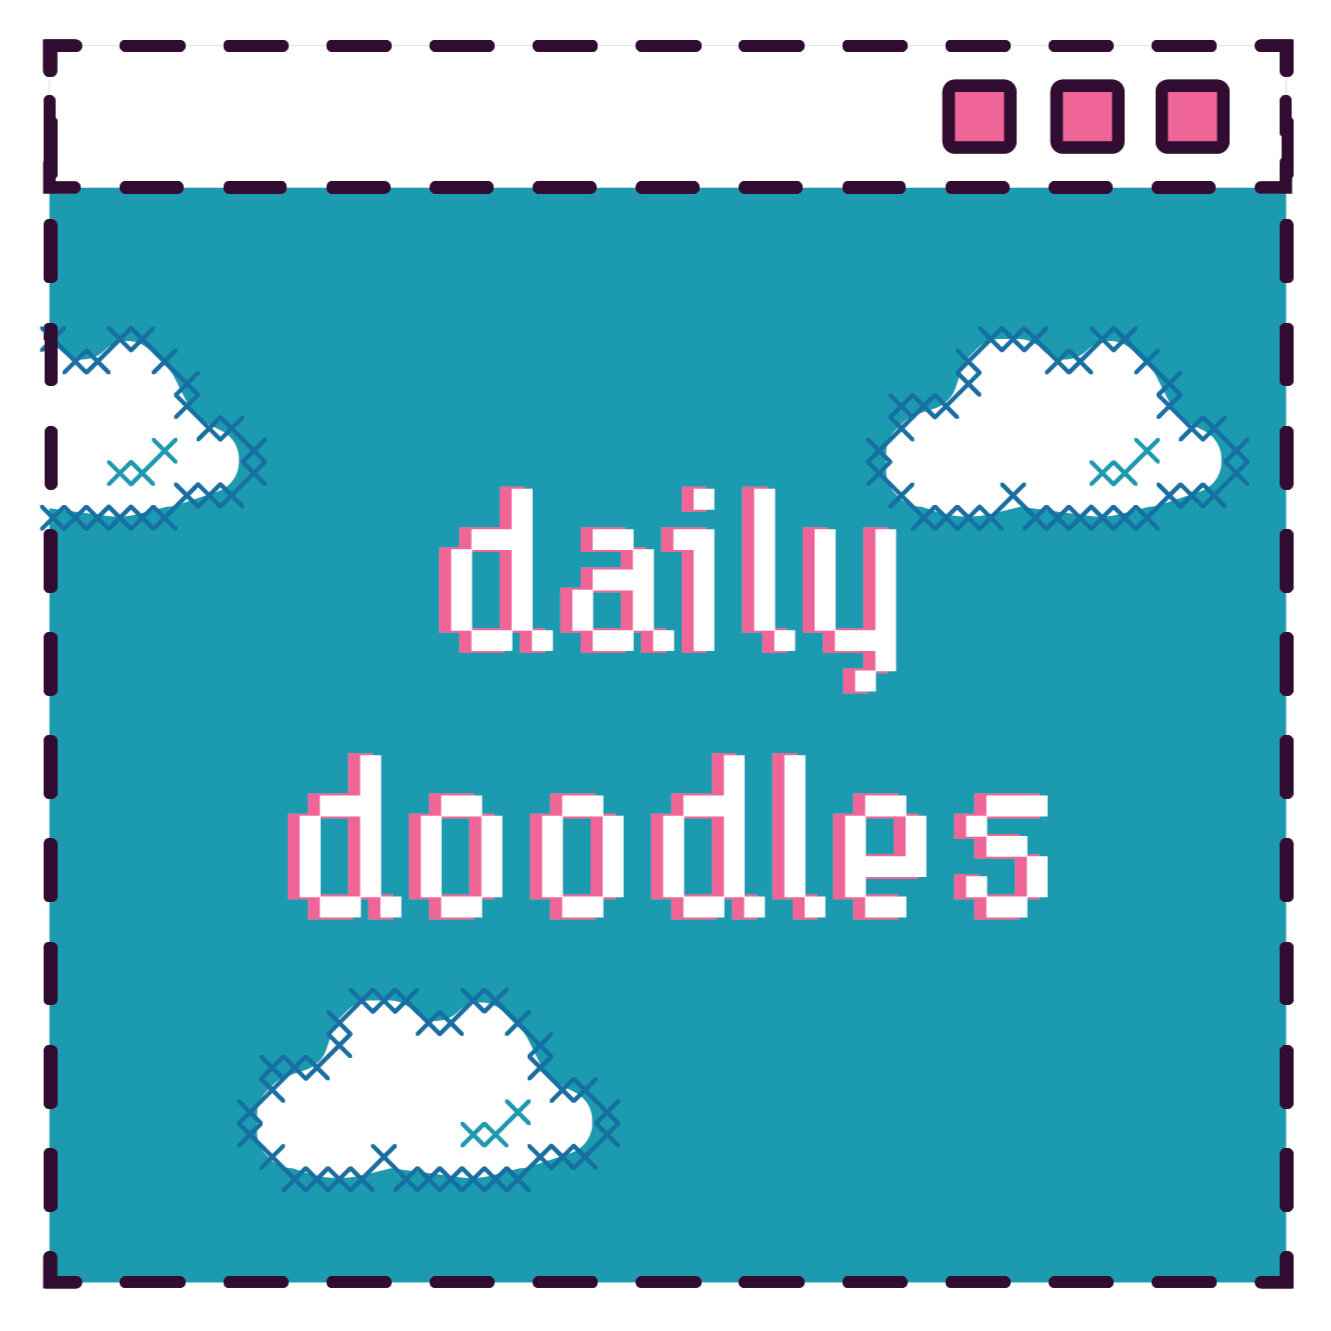 Copy+of+DailyDoodles_Daily+Doodles.jpg